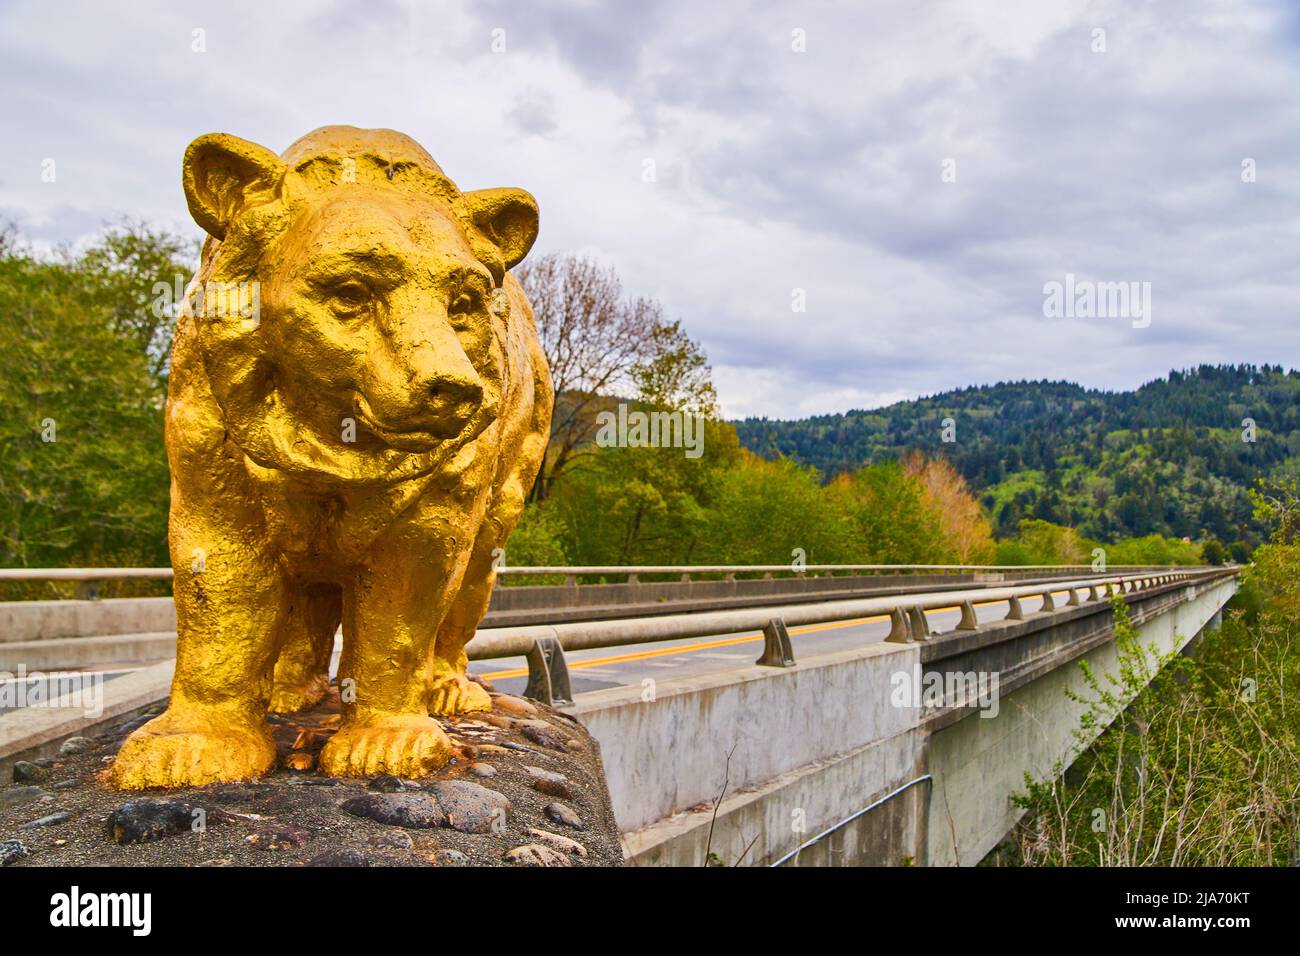 Bridge marked with giant gold bear statue at entrance Stock Photo